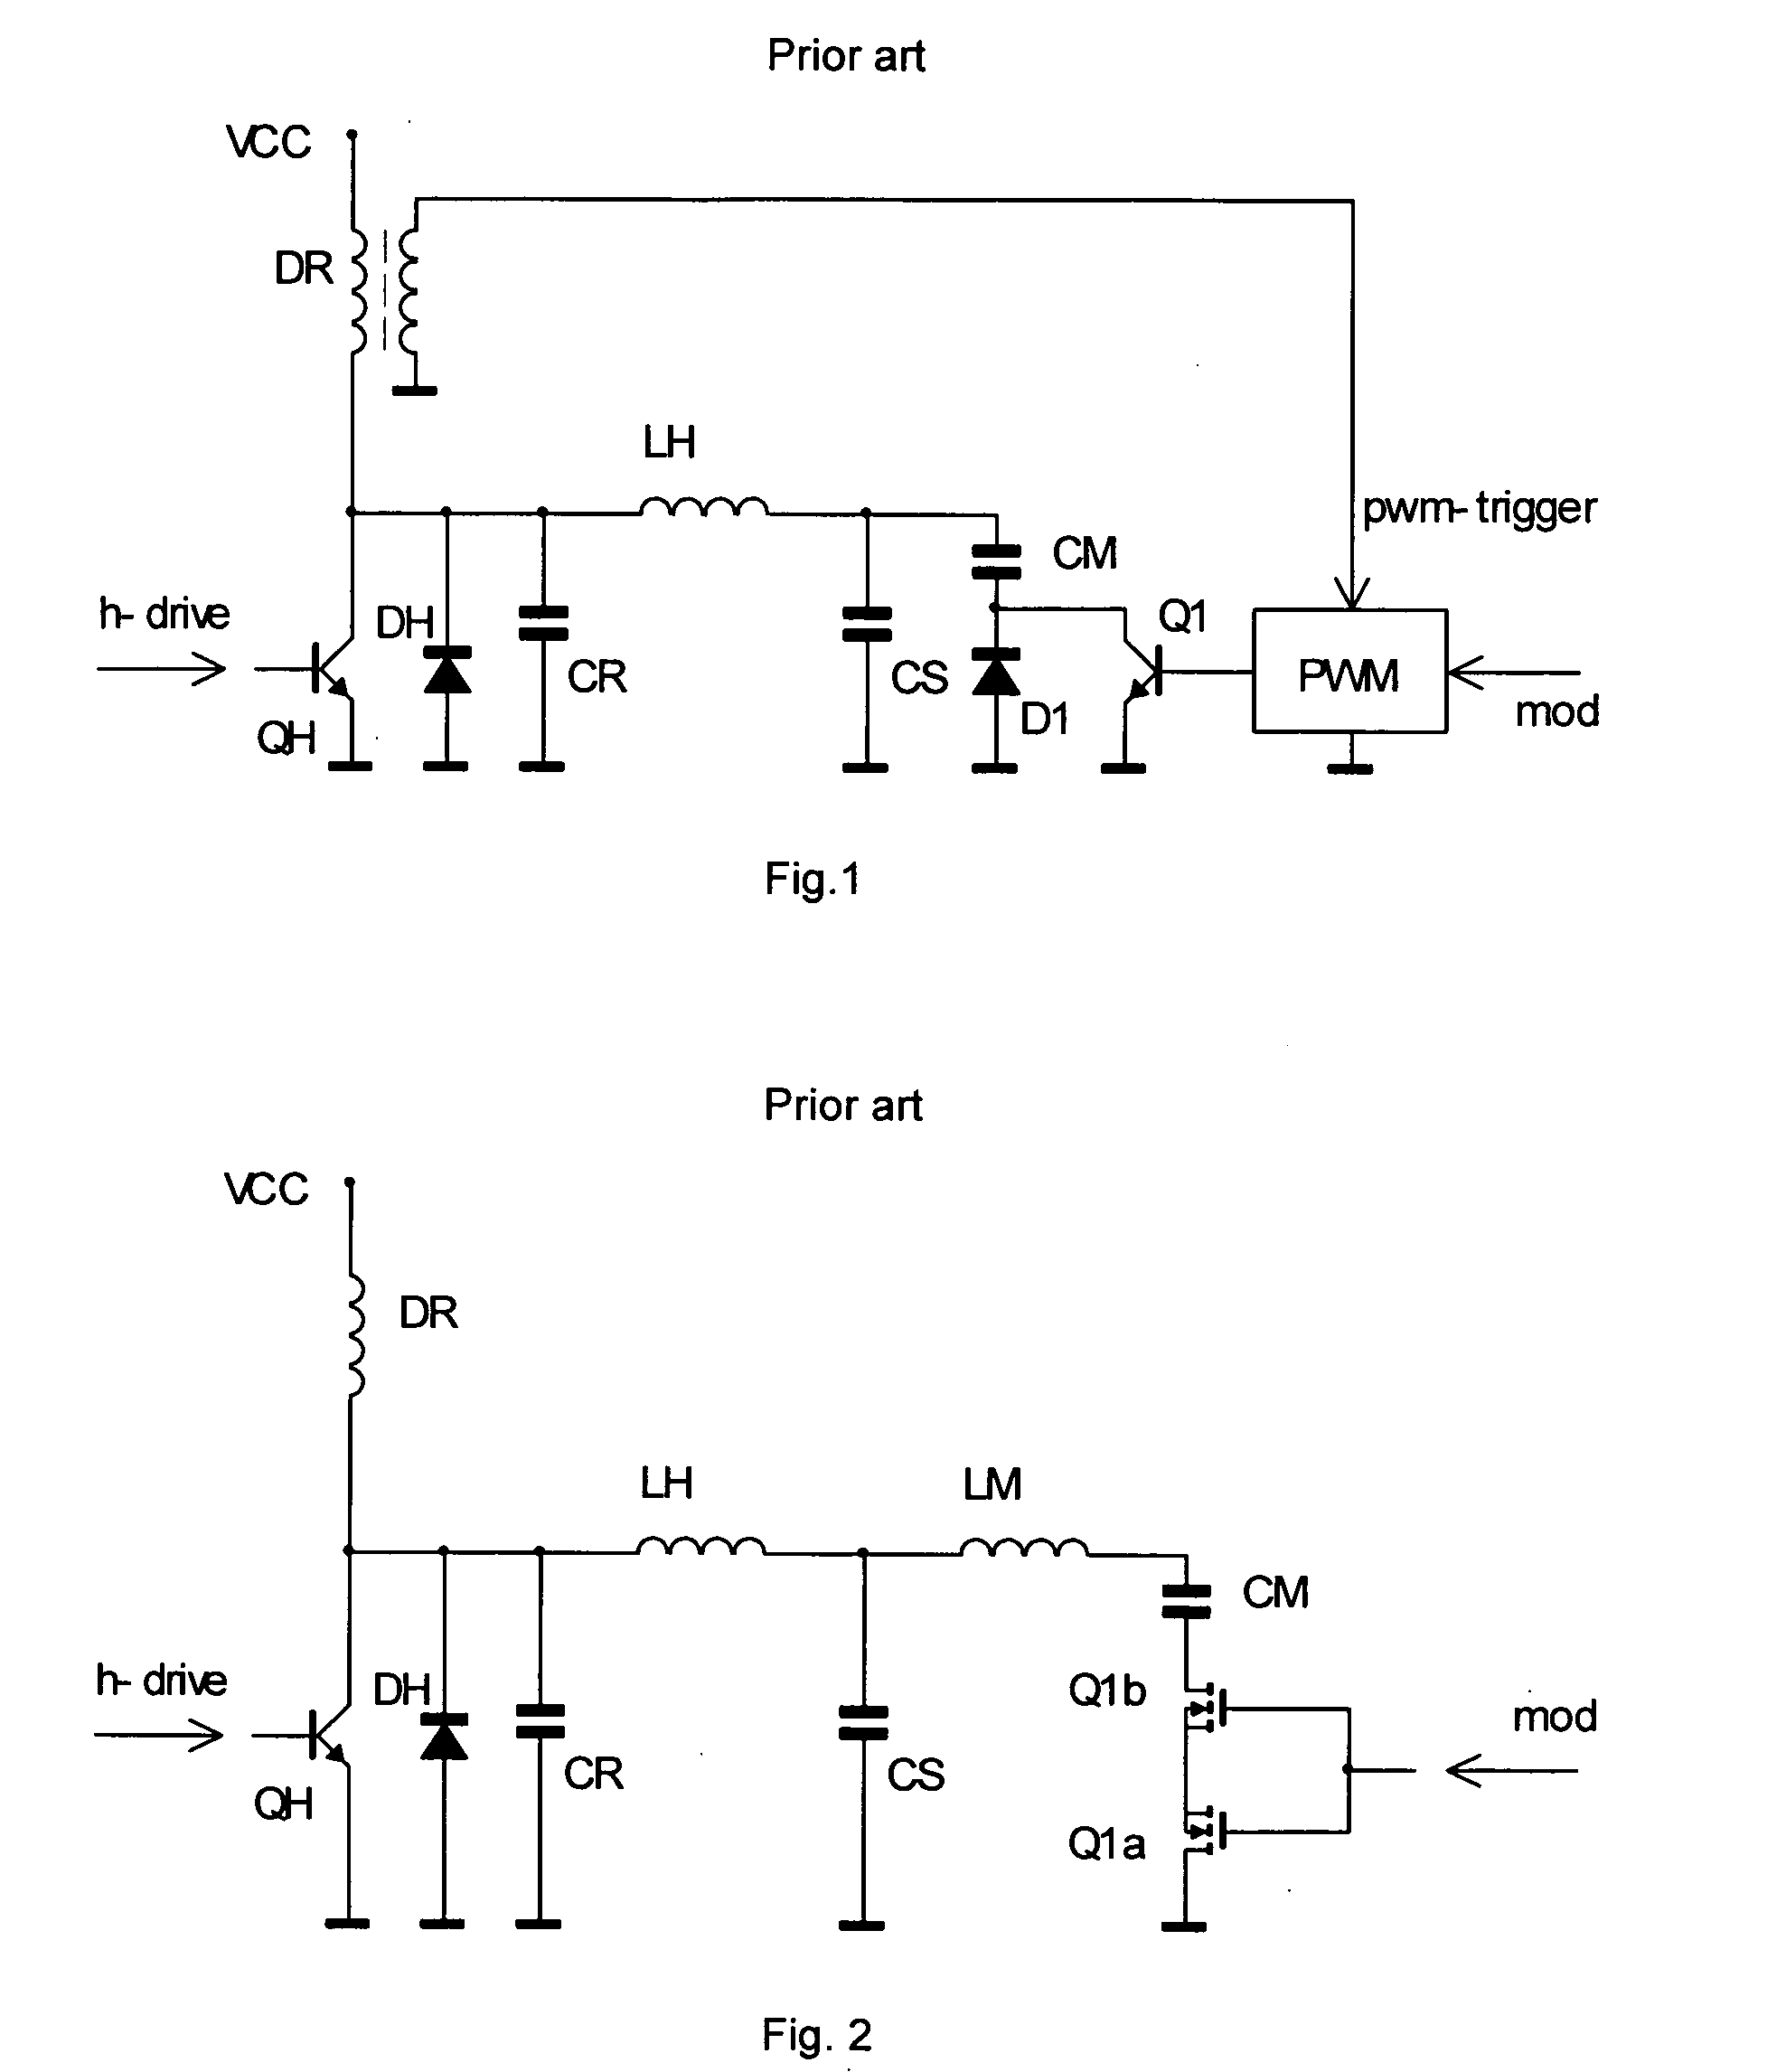 Controlled large signal capacitor and inductor